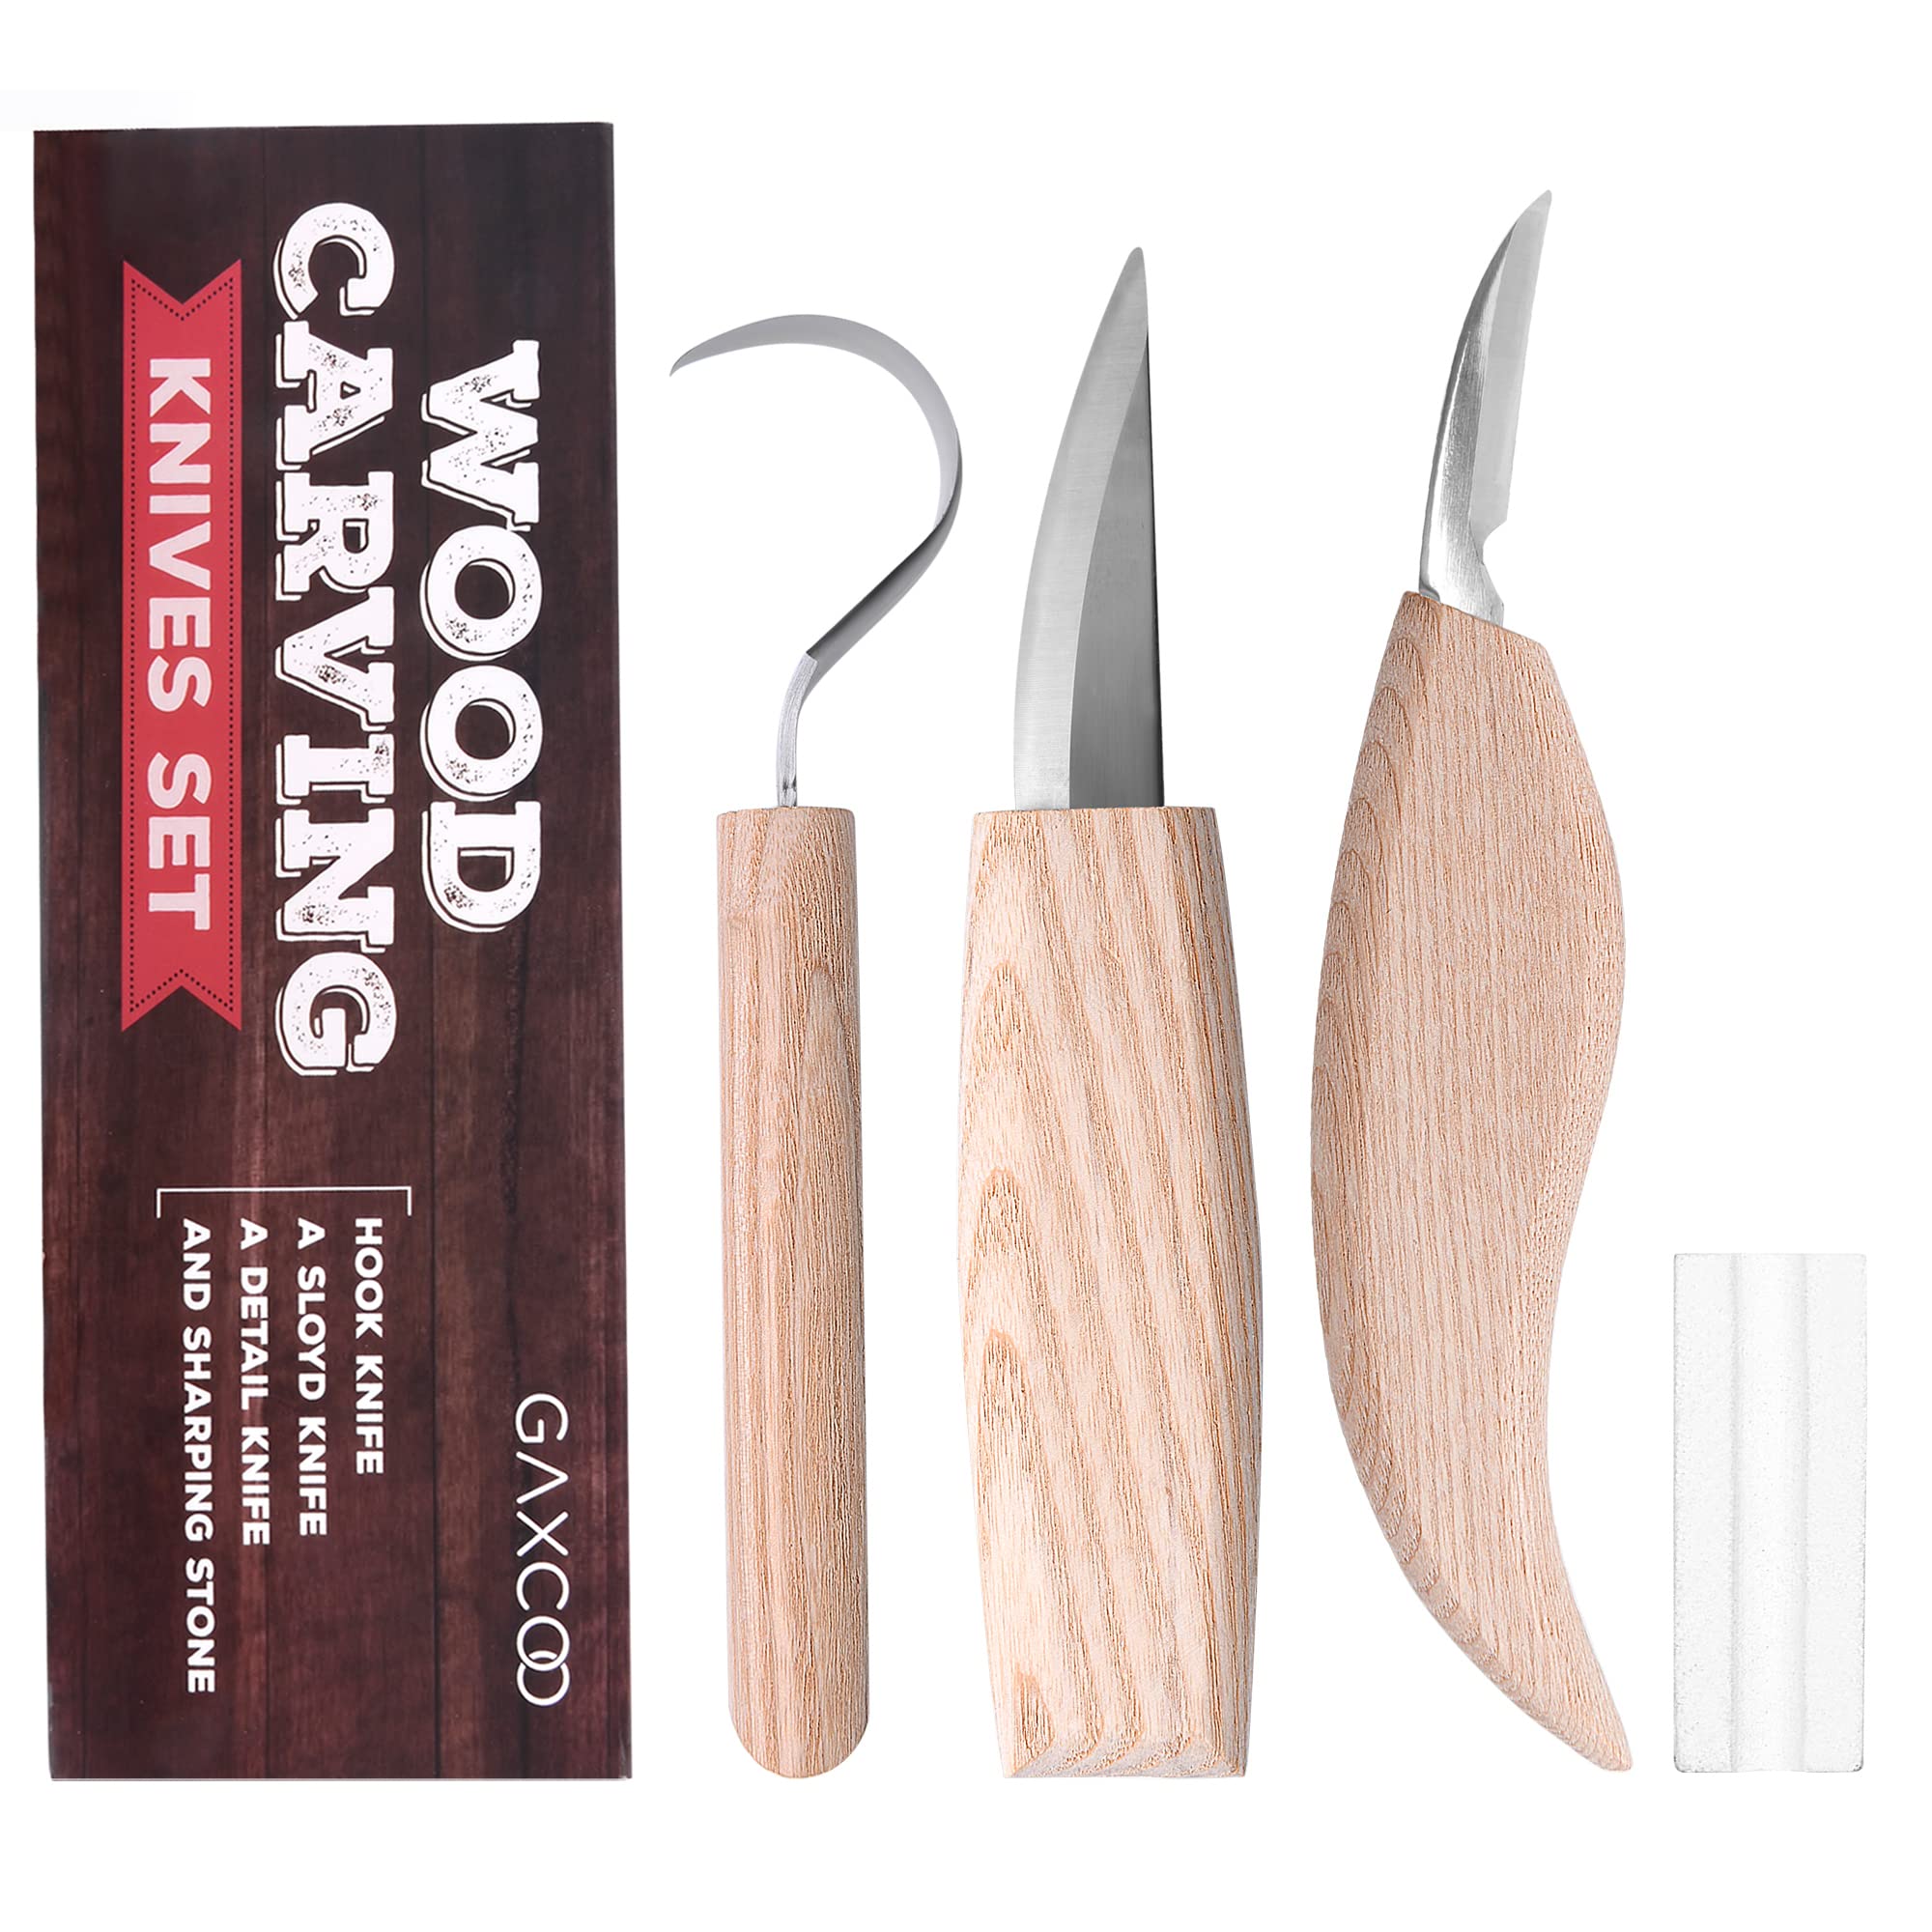 Gaxcoo Whittling Knife Wood Carving Tools Kit for Beginners Kids